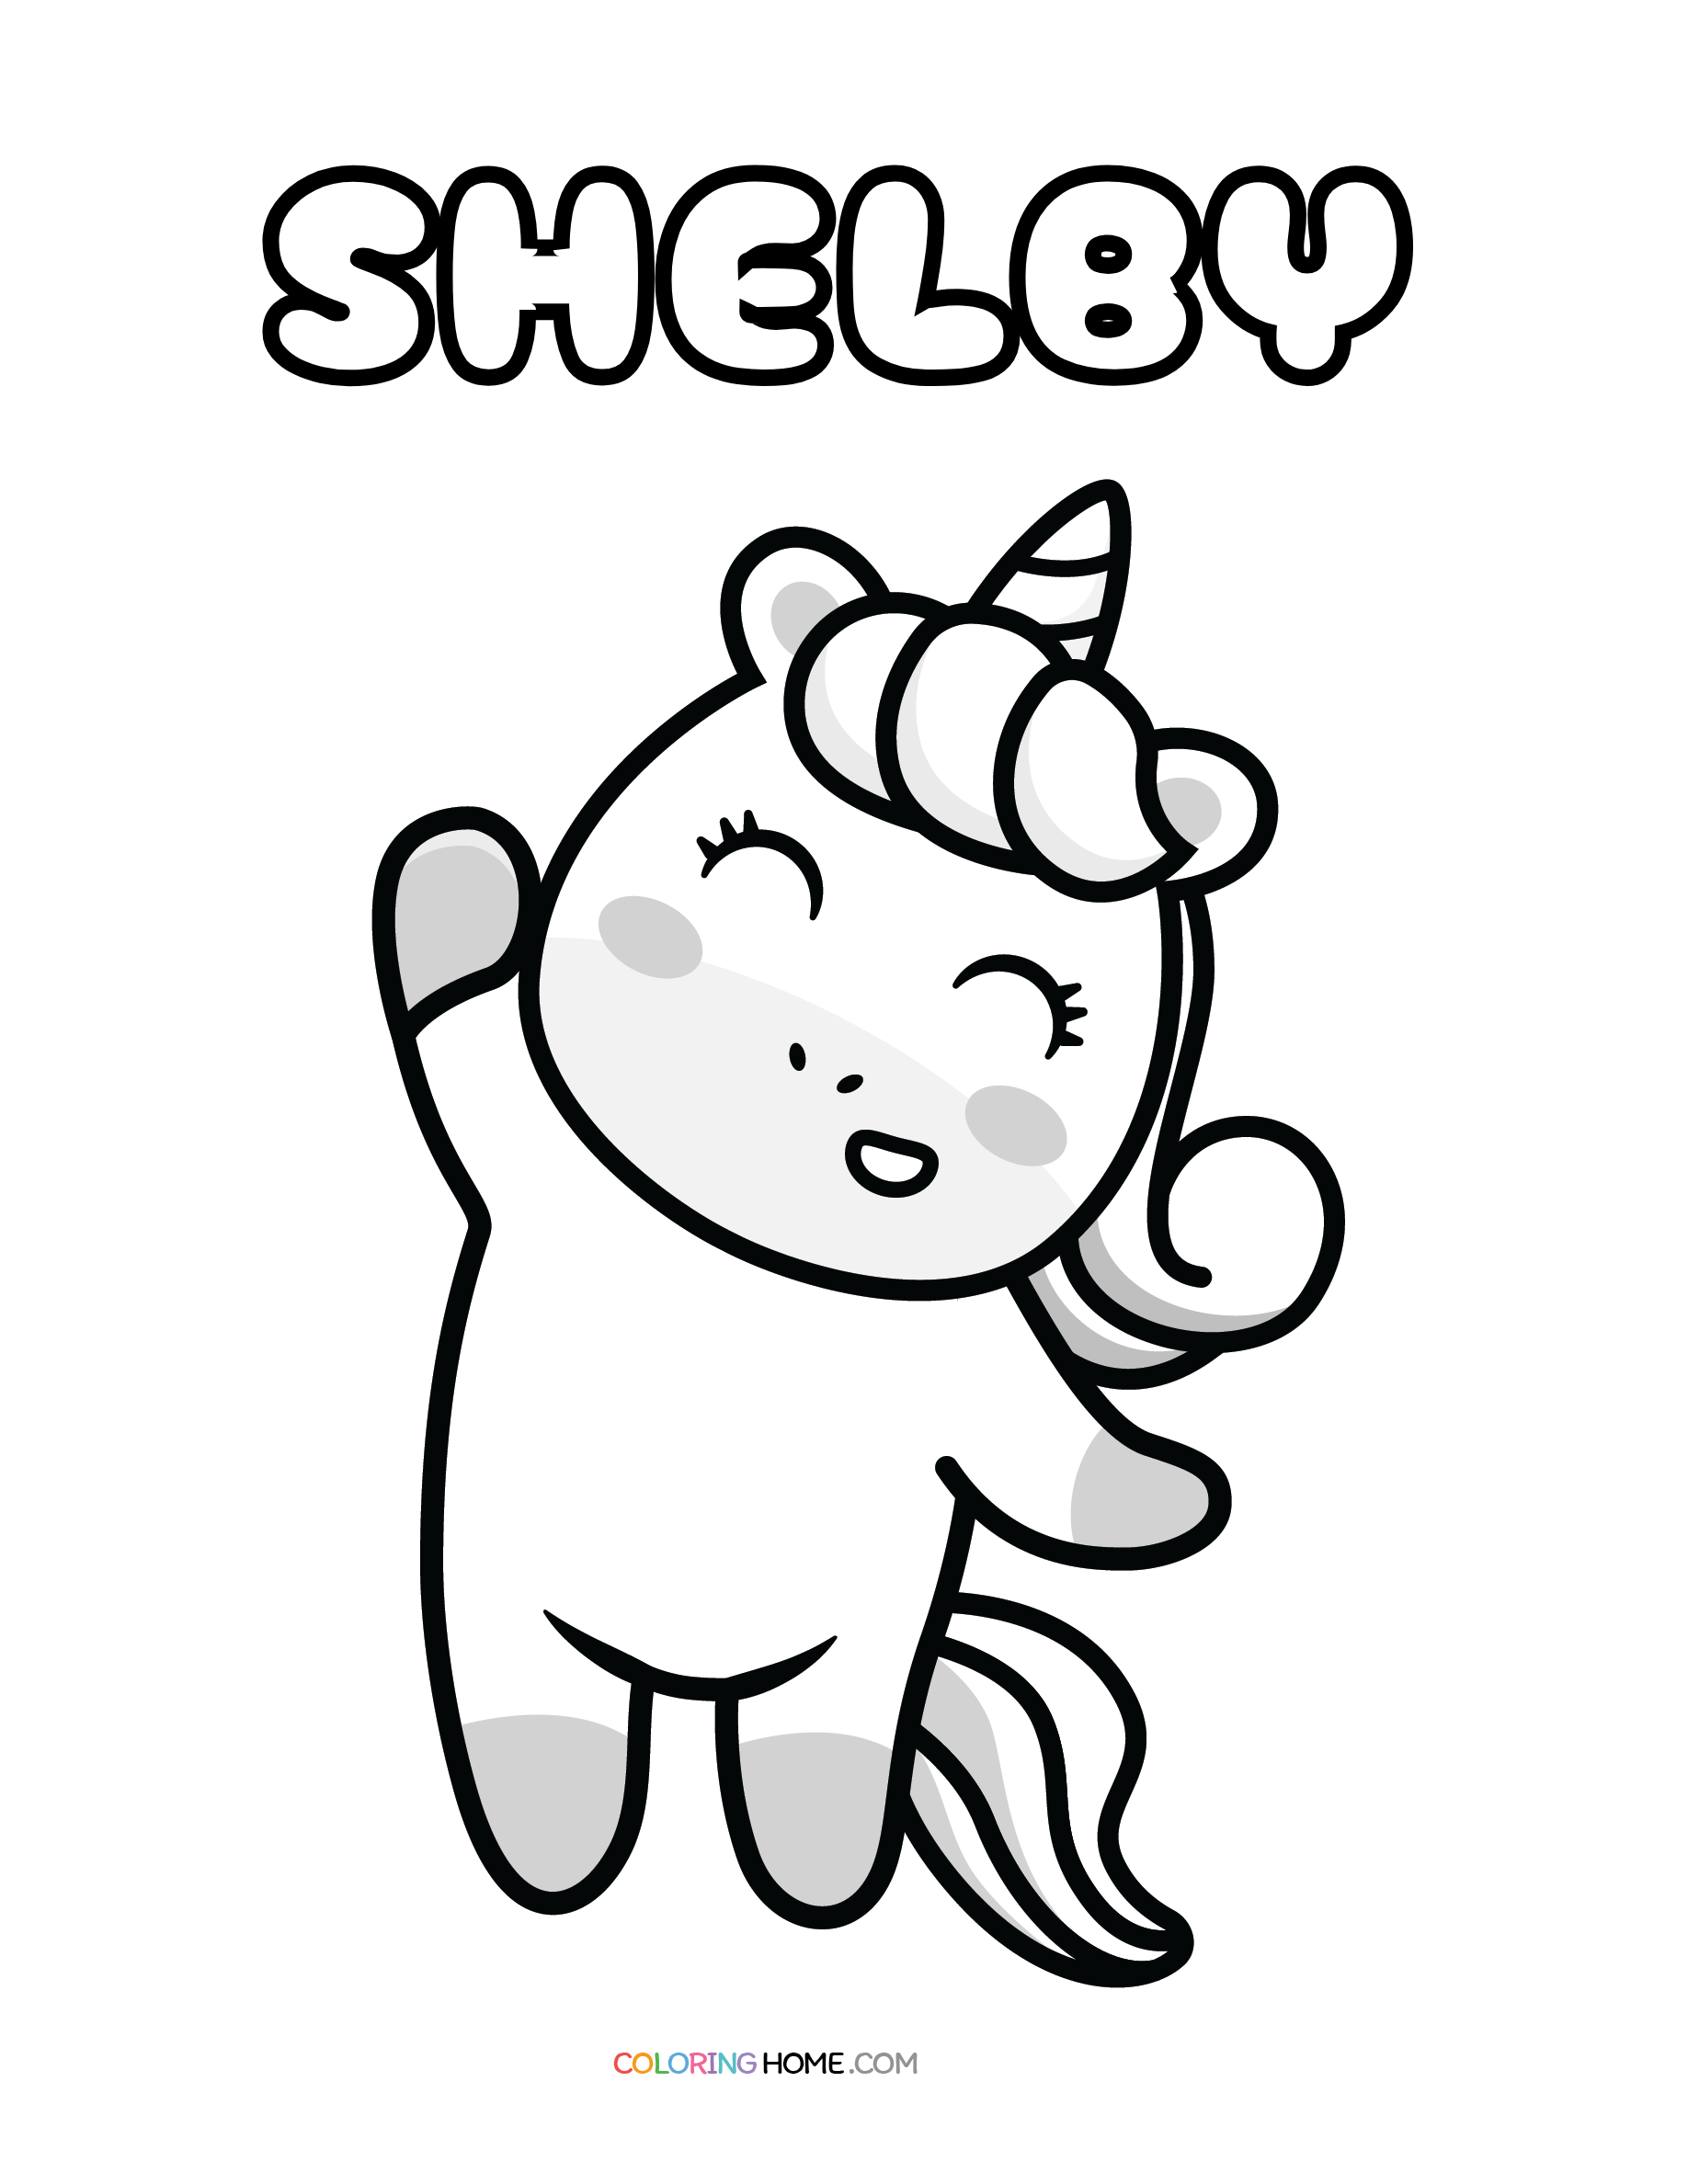 Shelby unicorn coloring page